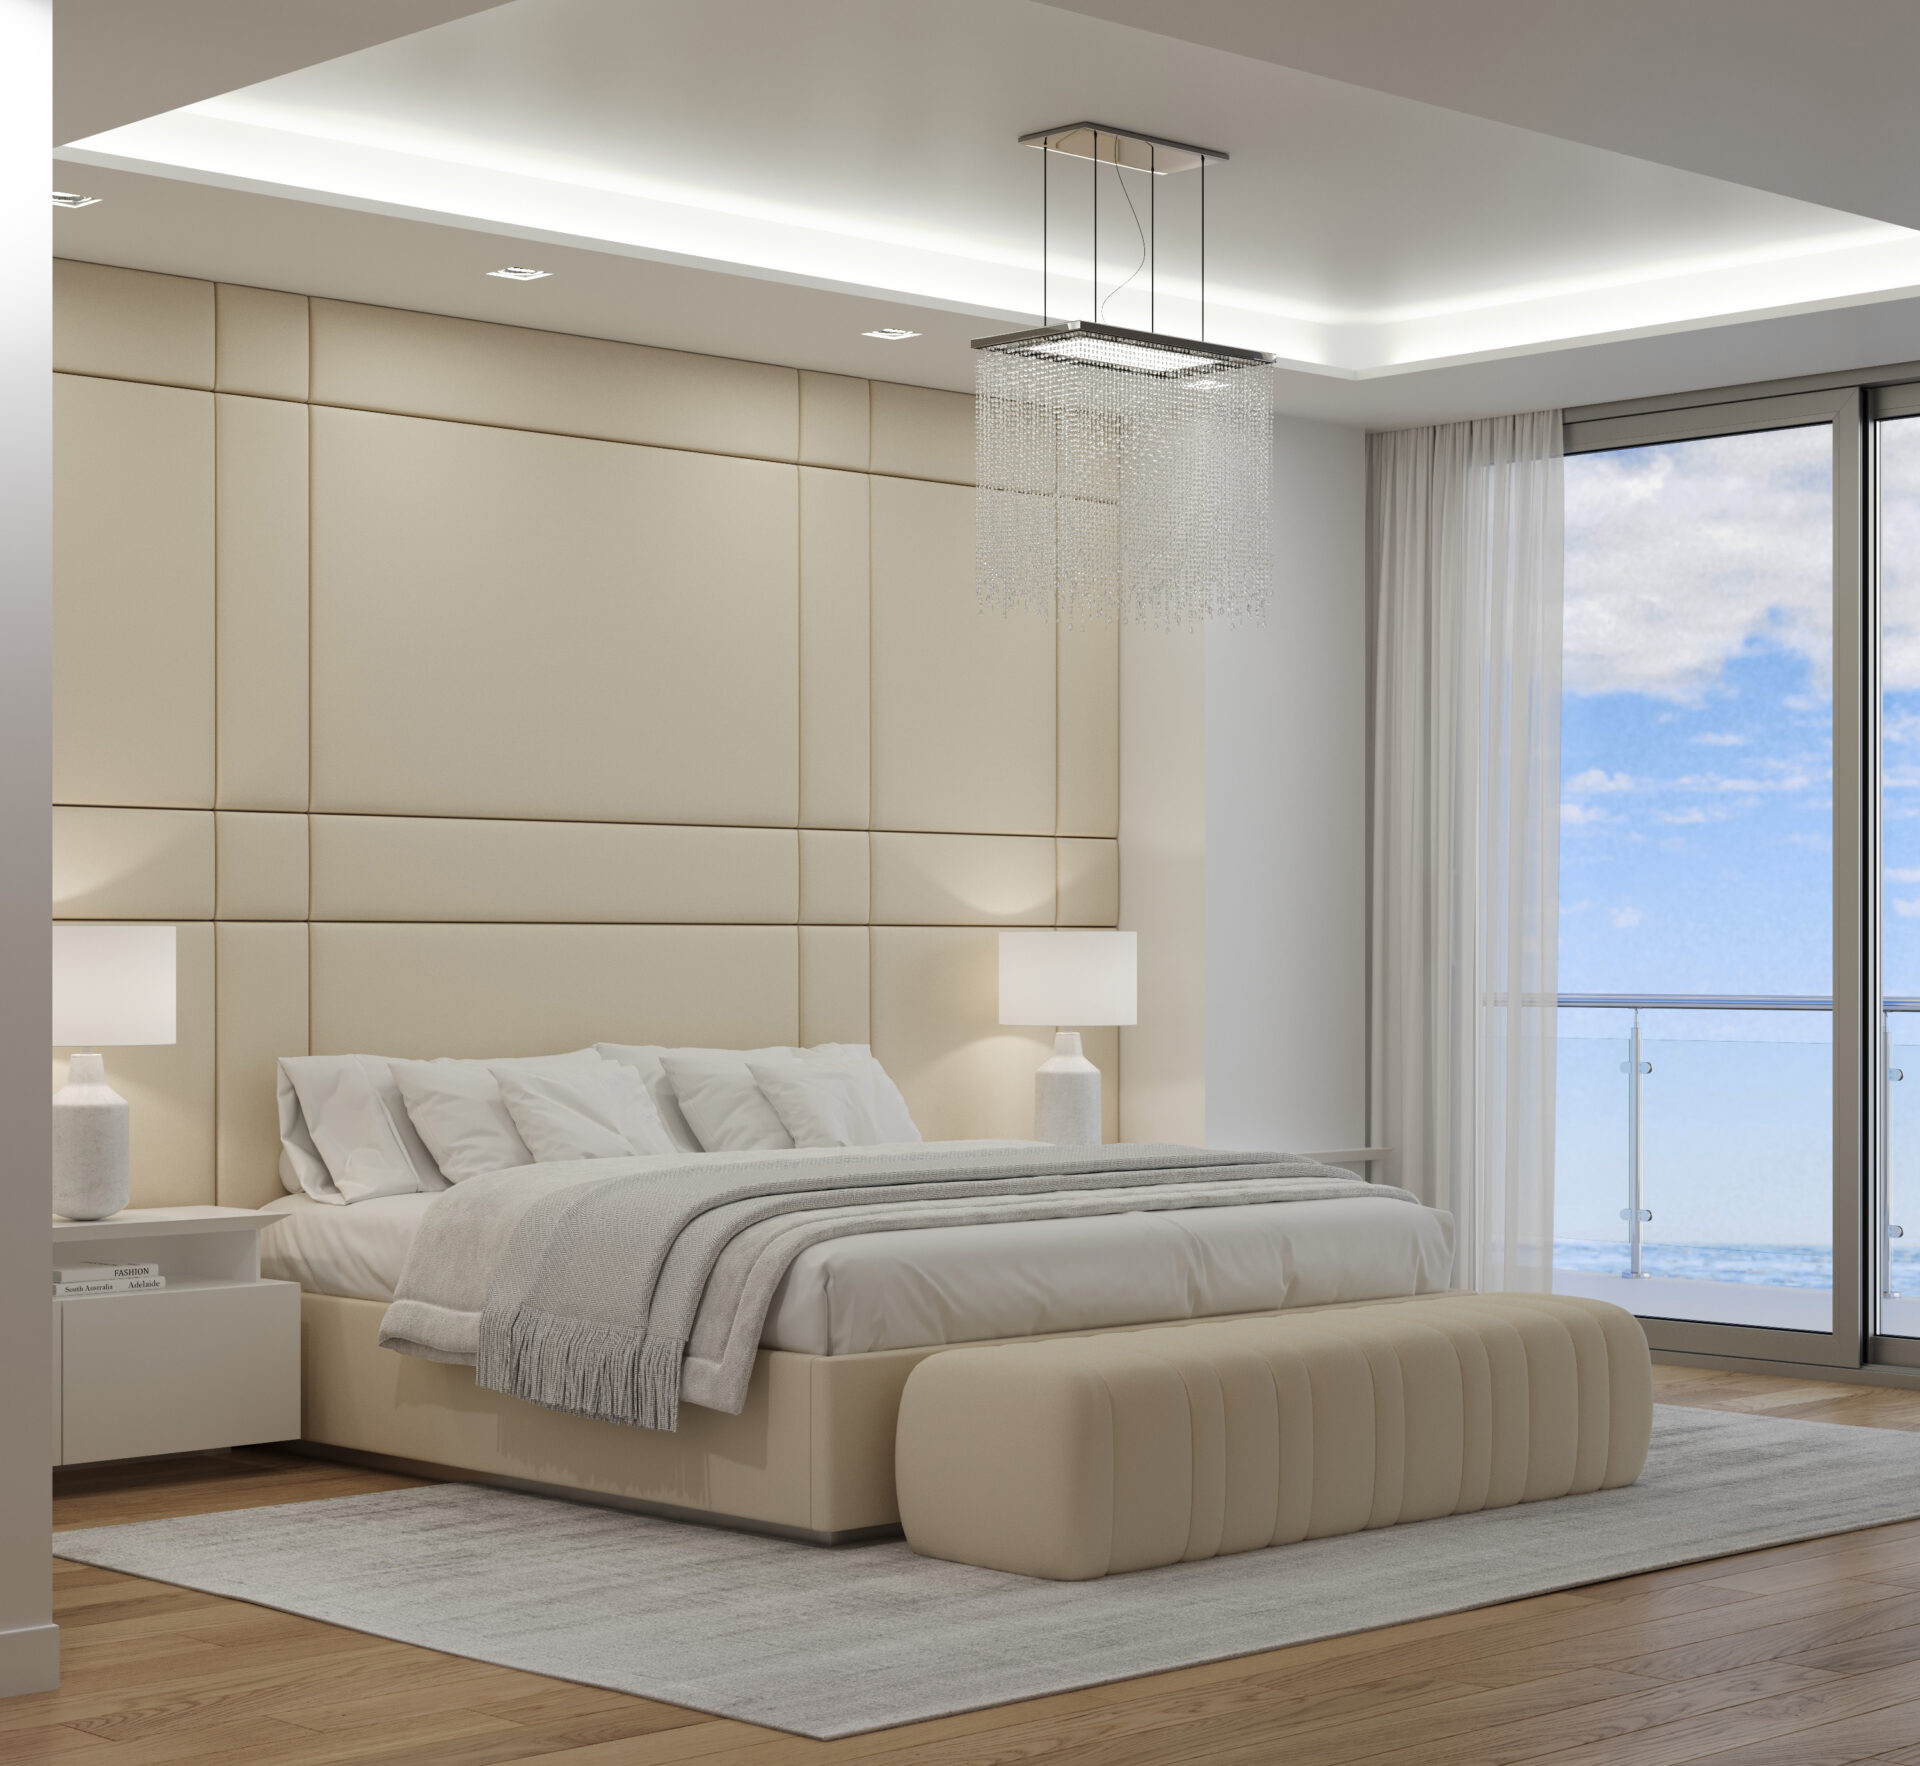 SOLOMAN 2 | Upholstered Wall Mounted Headboard & Bed, Luxury Furniture - Blend Home Furnishings